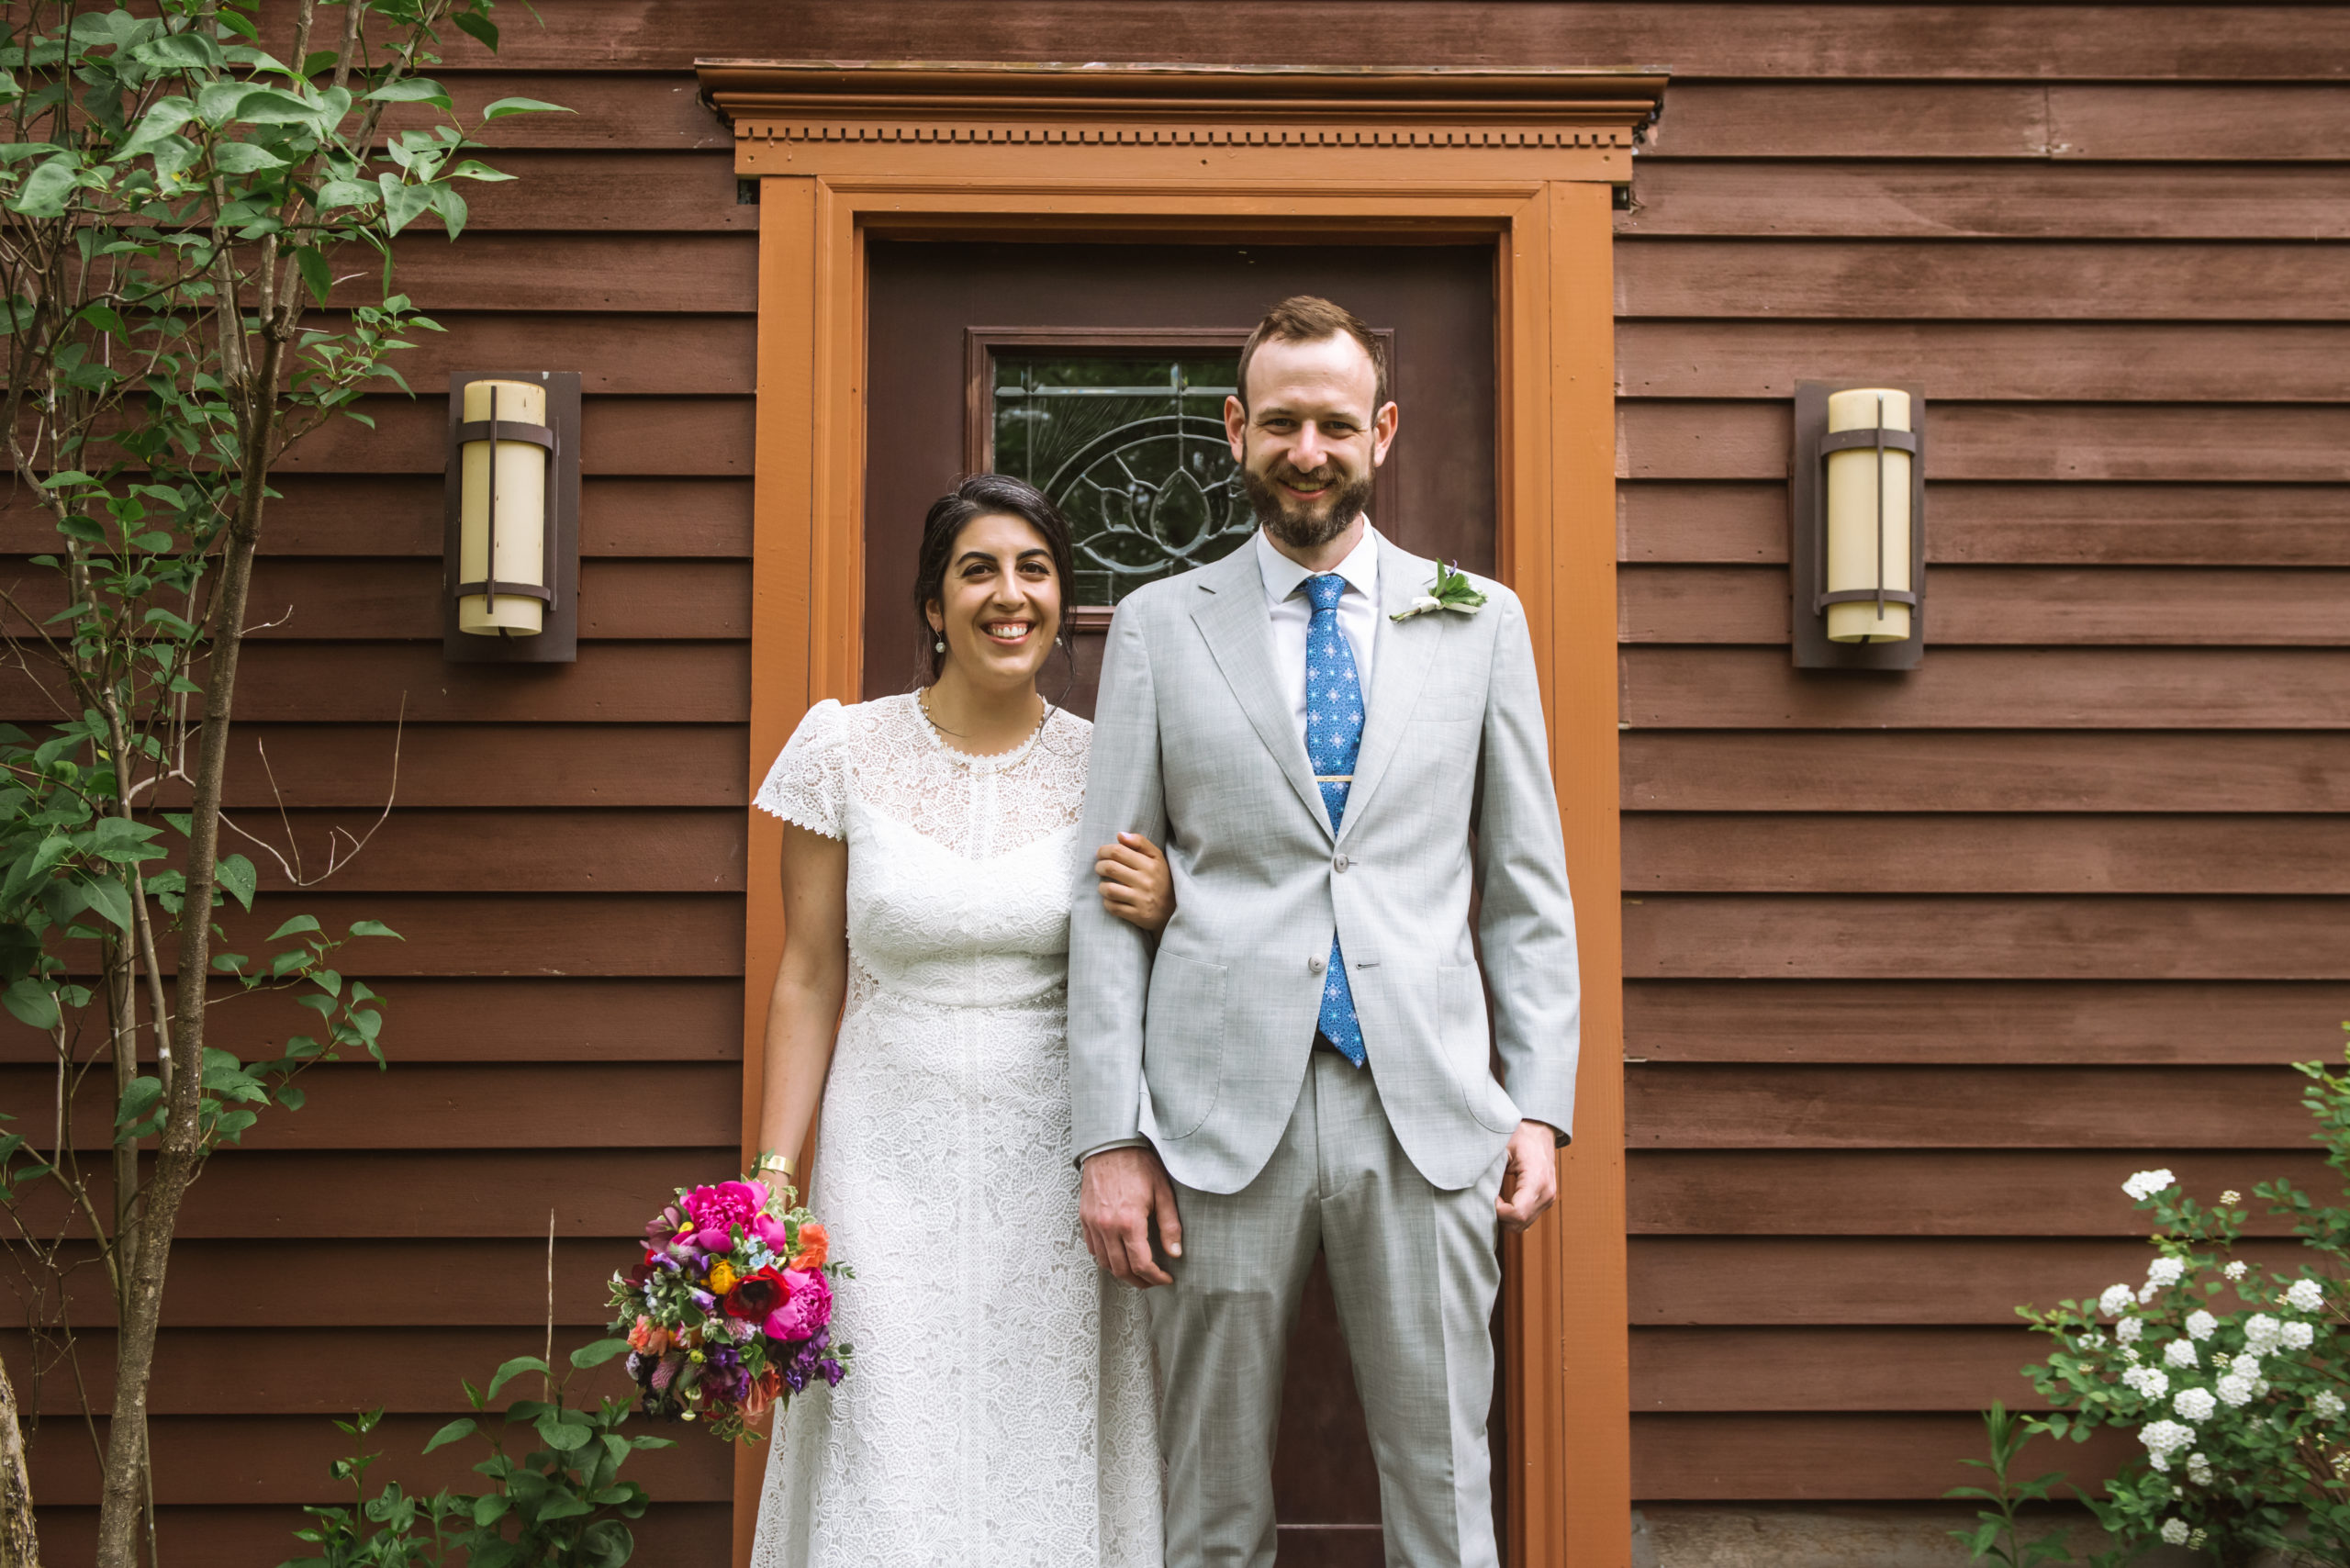 Bride and groom standing side by side, with the bride's left hand wrapped around the groom's right arm. They are both smiling, looking straight to the camera. The bride is holding her bouquet in her right hand and the groom has both hands relaxed at his sides. They are standing in front of a dark red wood house's front door with greenery and trees surrounding the facade.